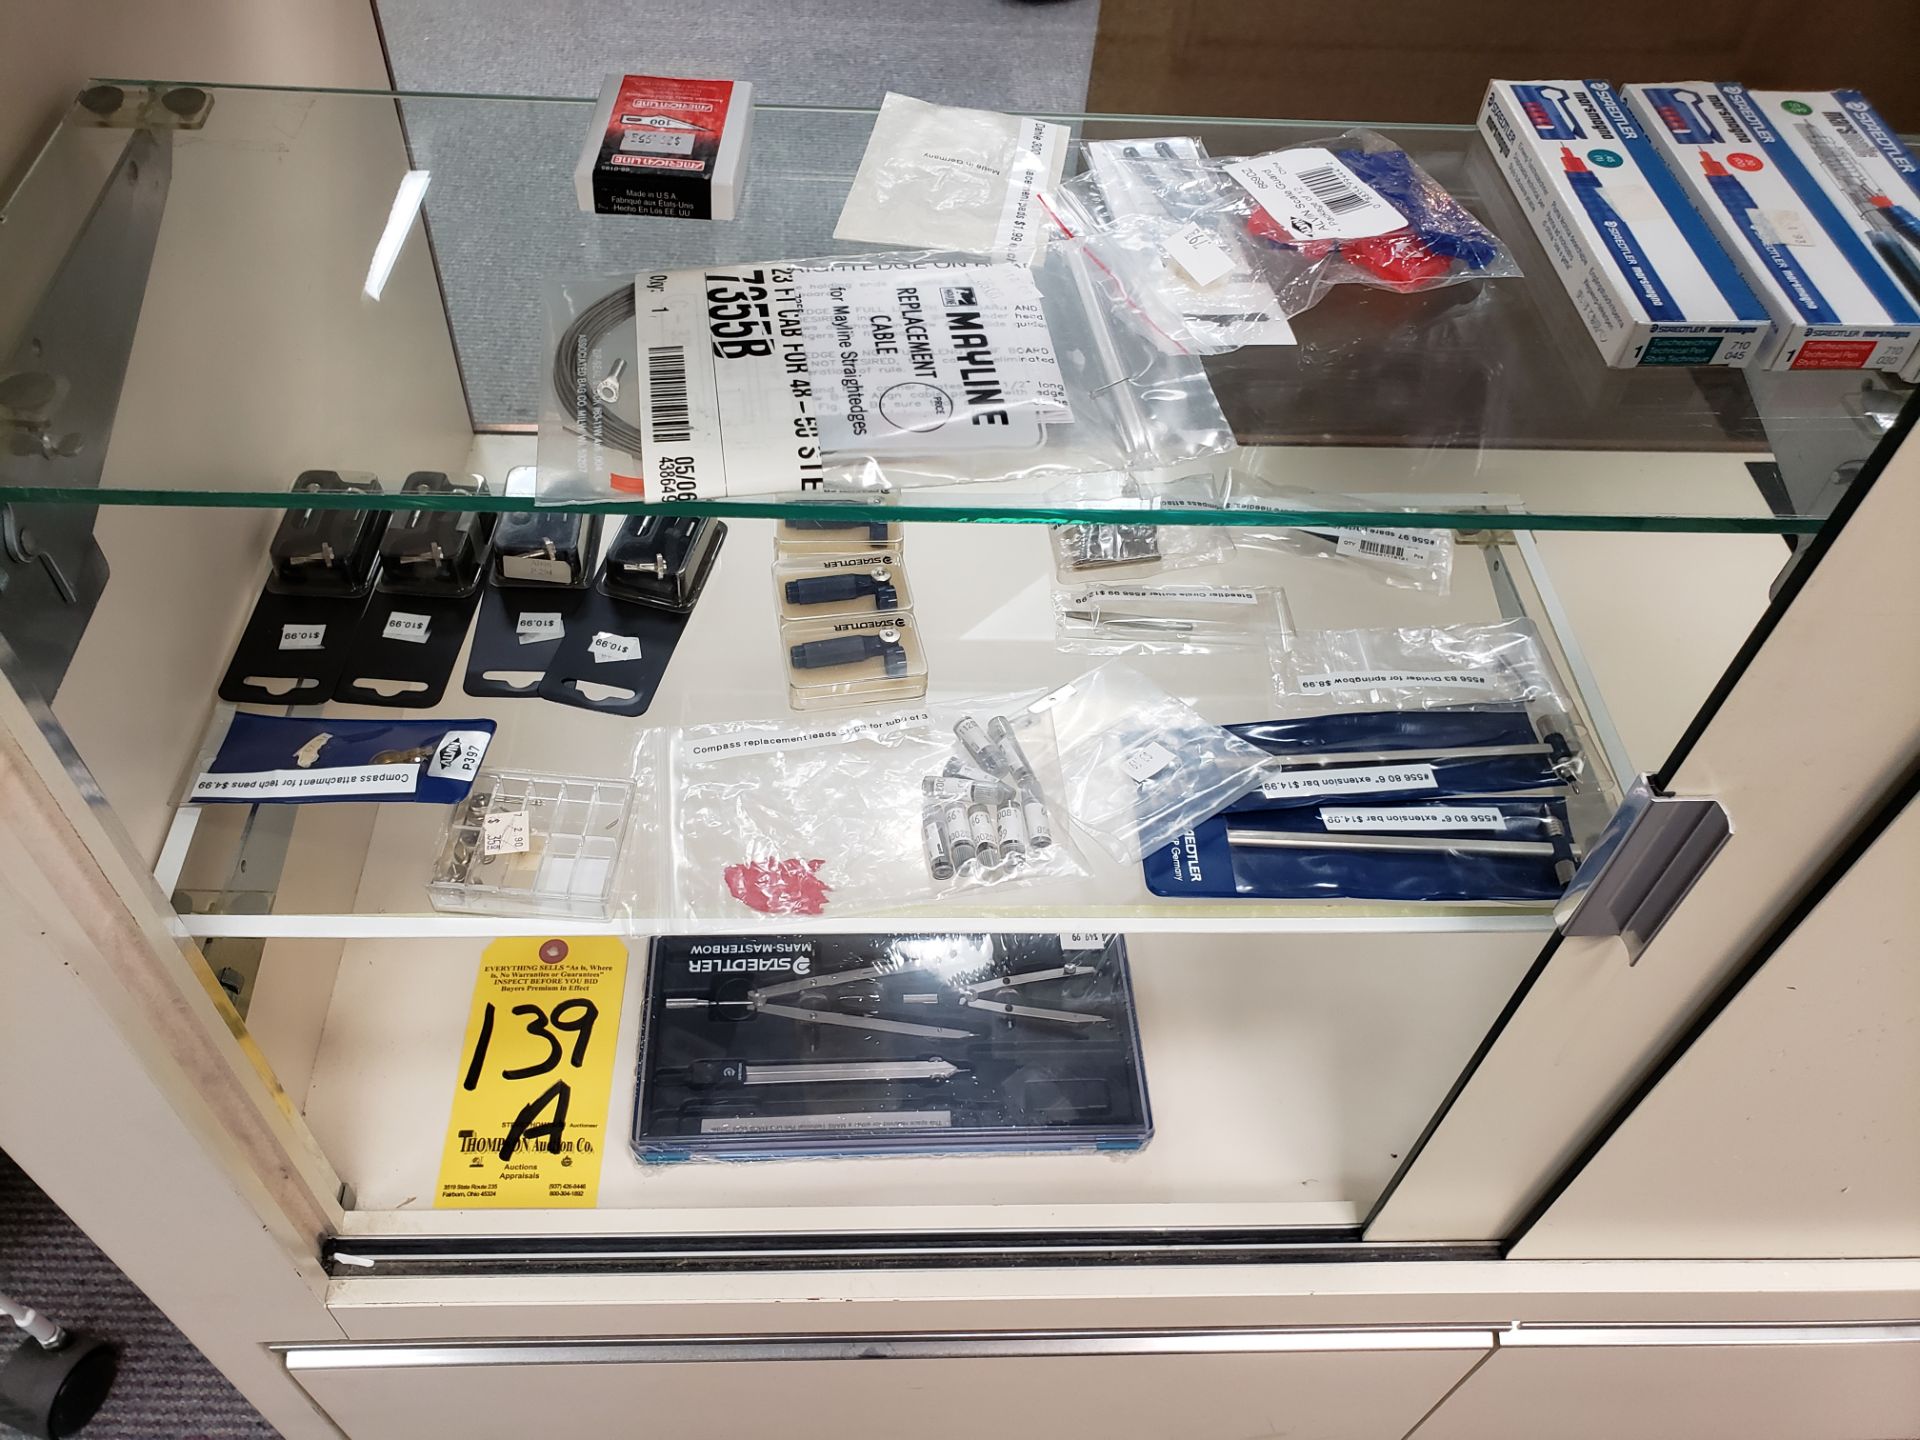 Staedtler Drafting Kit and Accessories